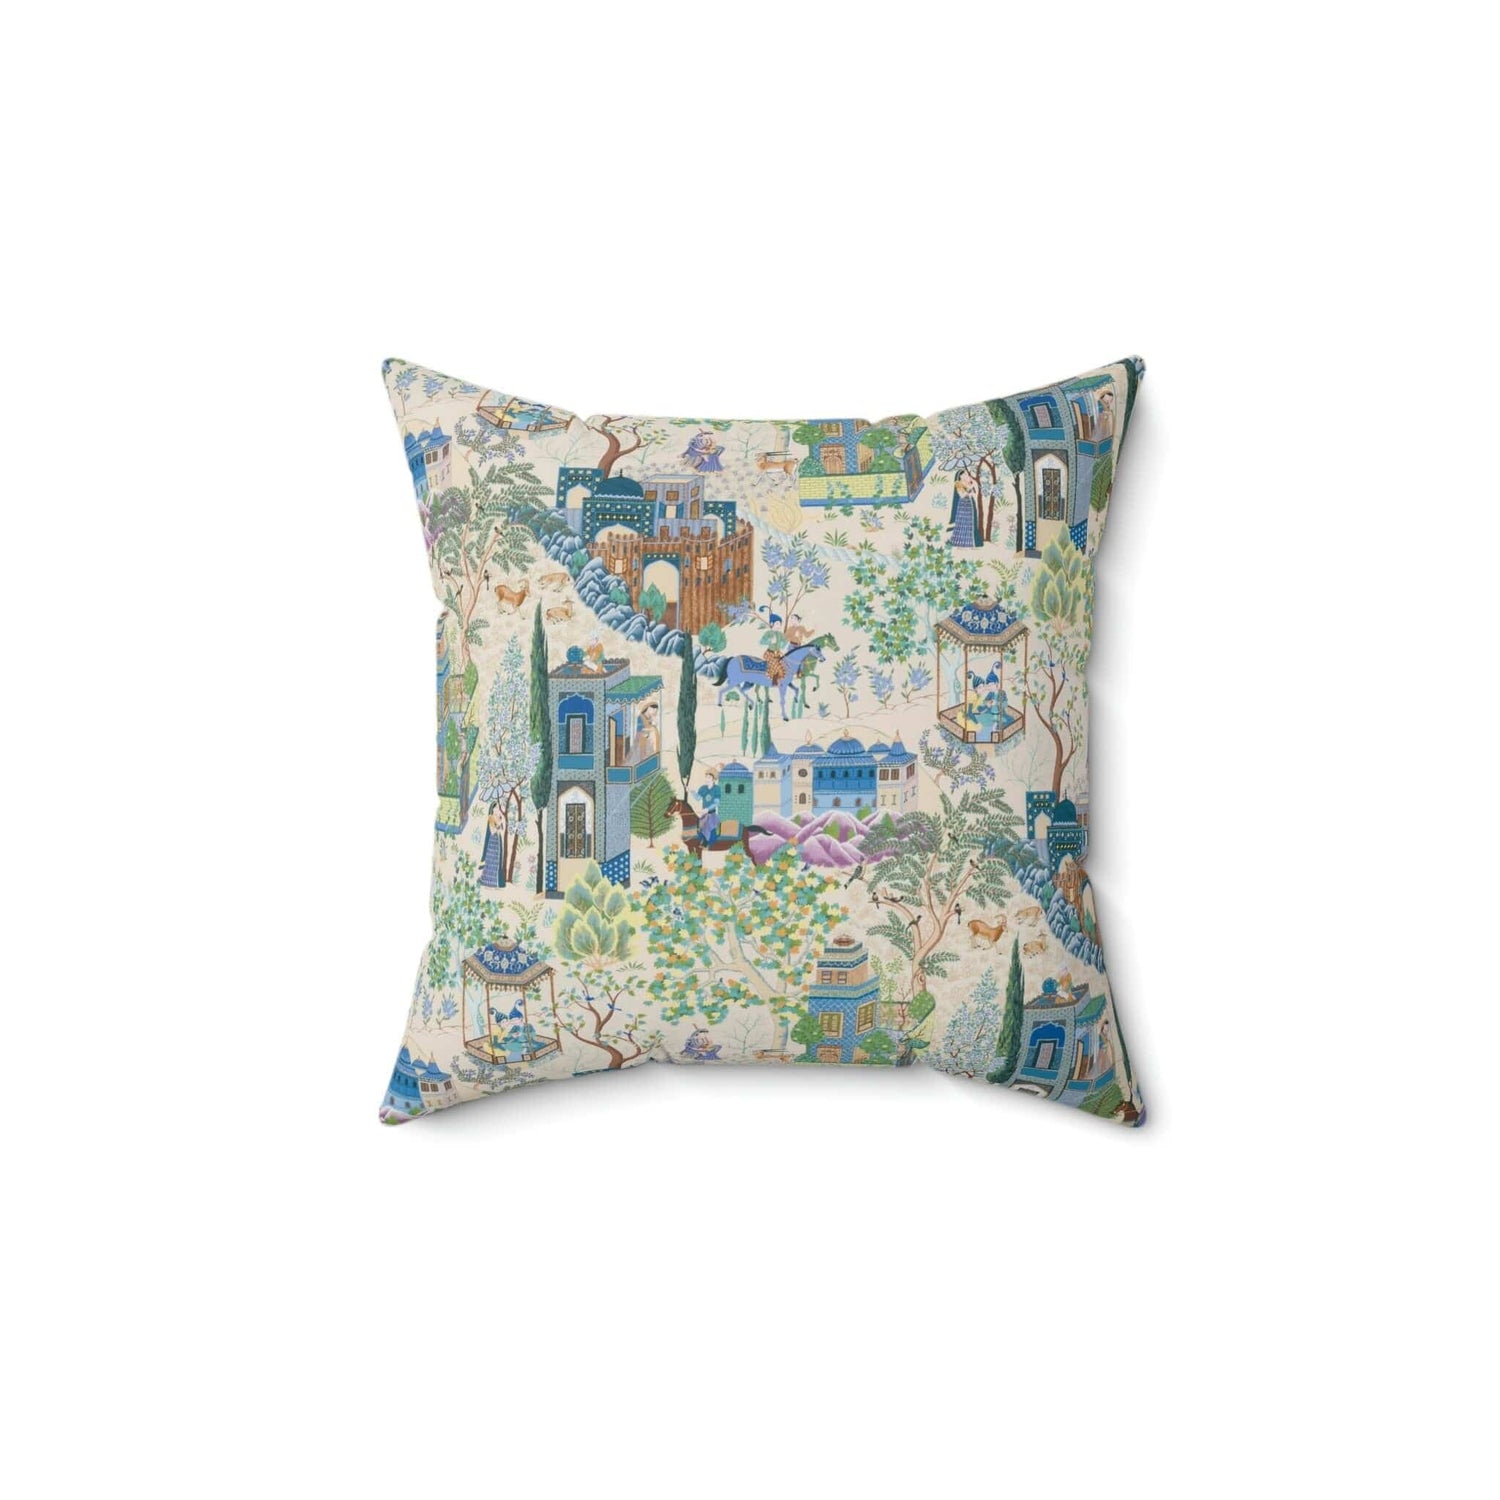 Kate McEnroe New York Toile De Jouy Throw Pillow with Insert, Vintage Blue, Green Floral Print, Asian Country Scene, Characters on Horseback, Rustic Chic DecorThrow Pillows30655169871428479428